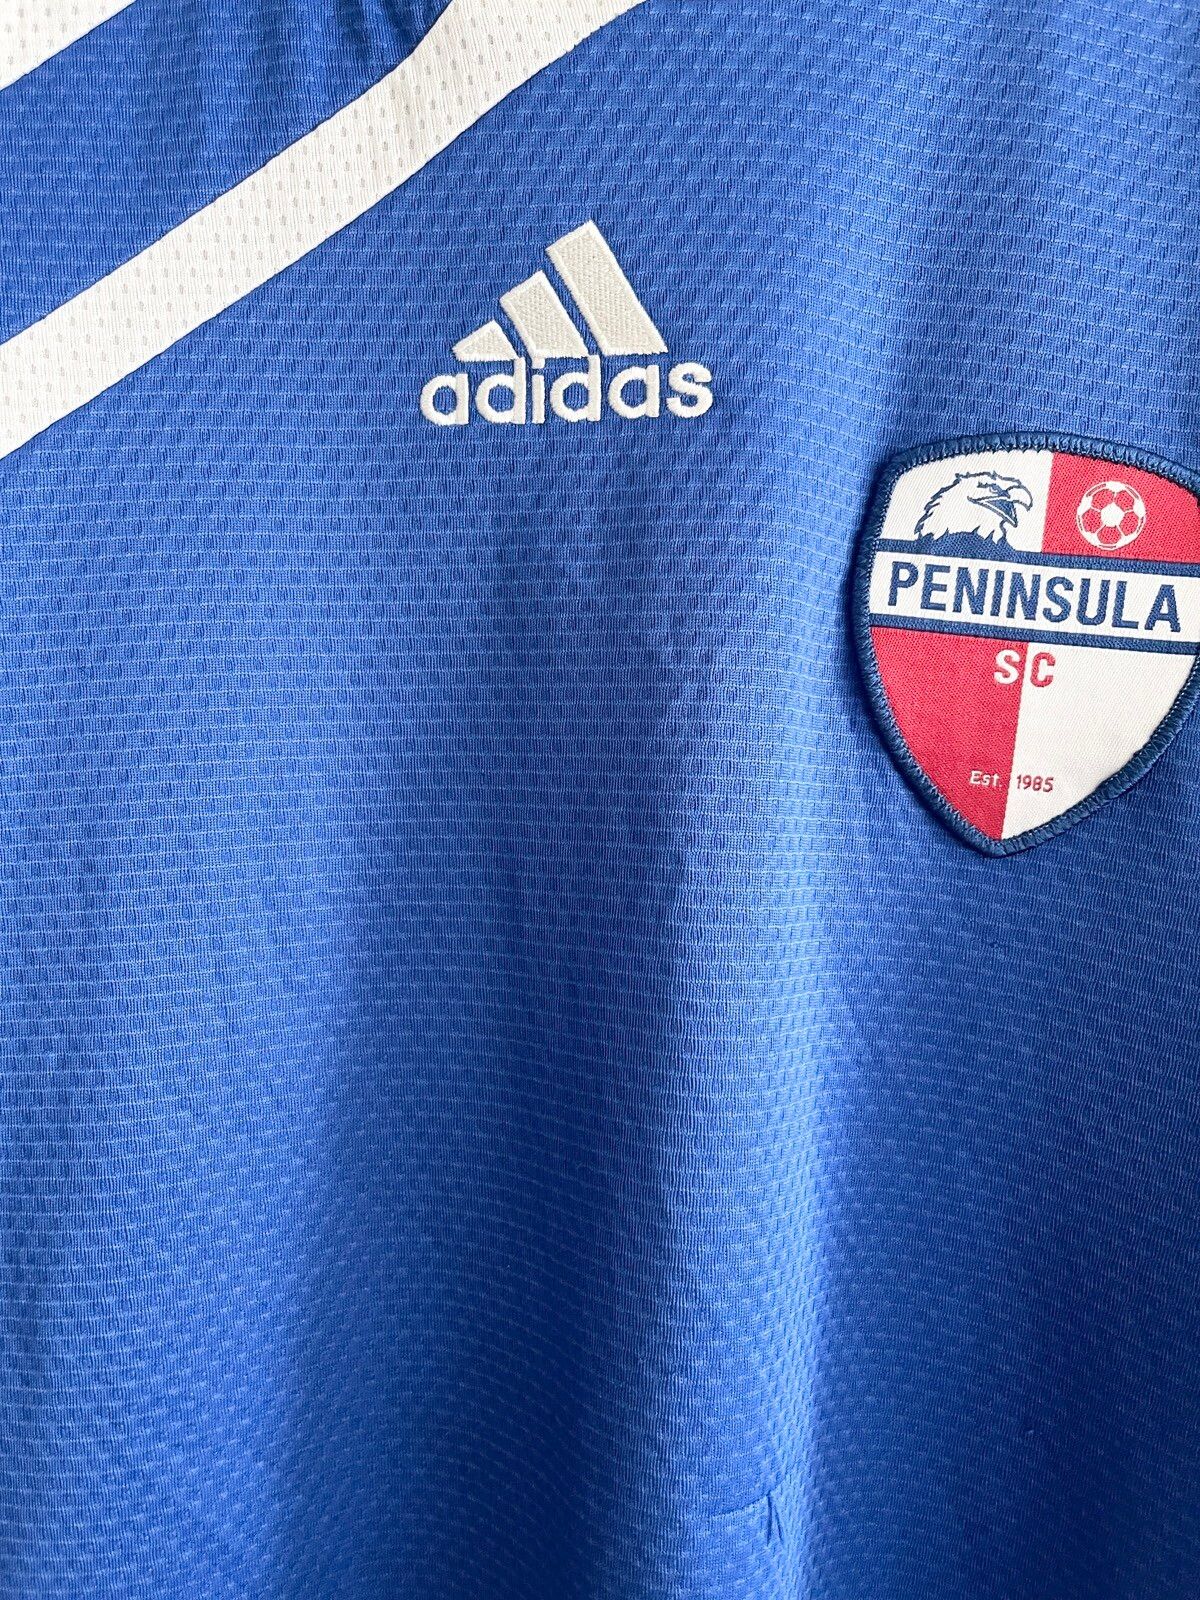 STEAL! Vintage 2010 Peninsula Soccer Club Home Jersey - 3